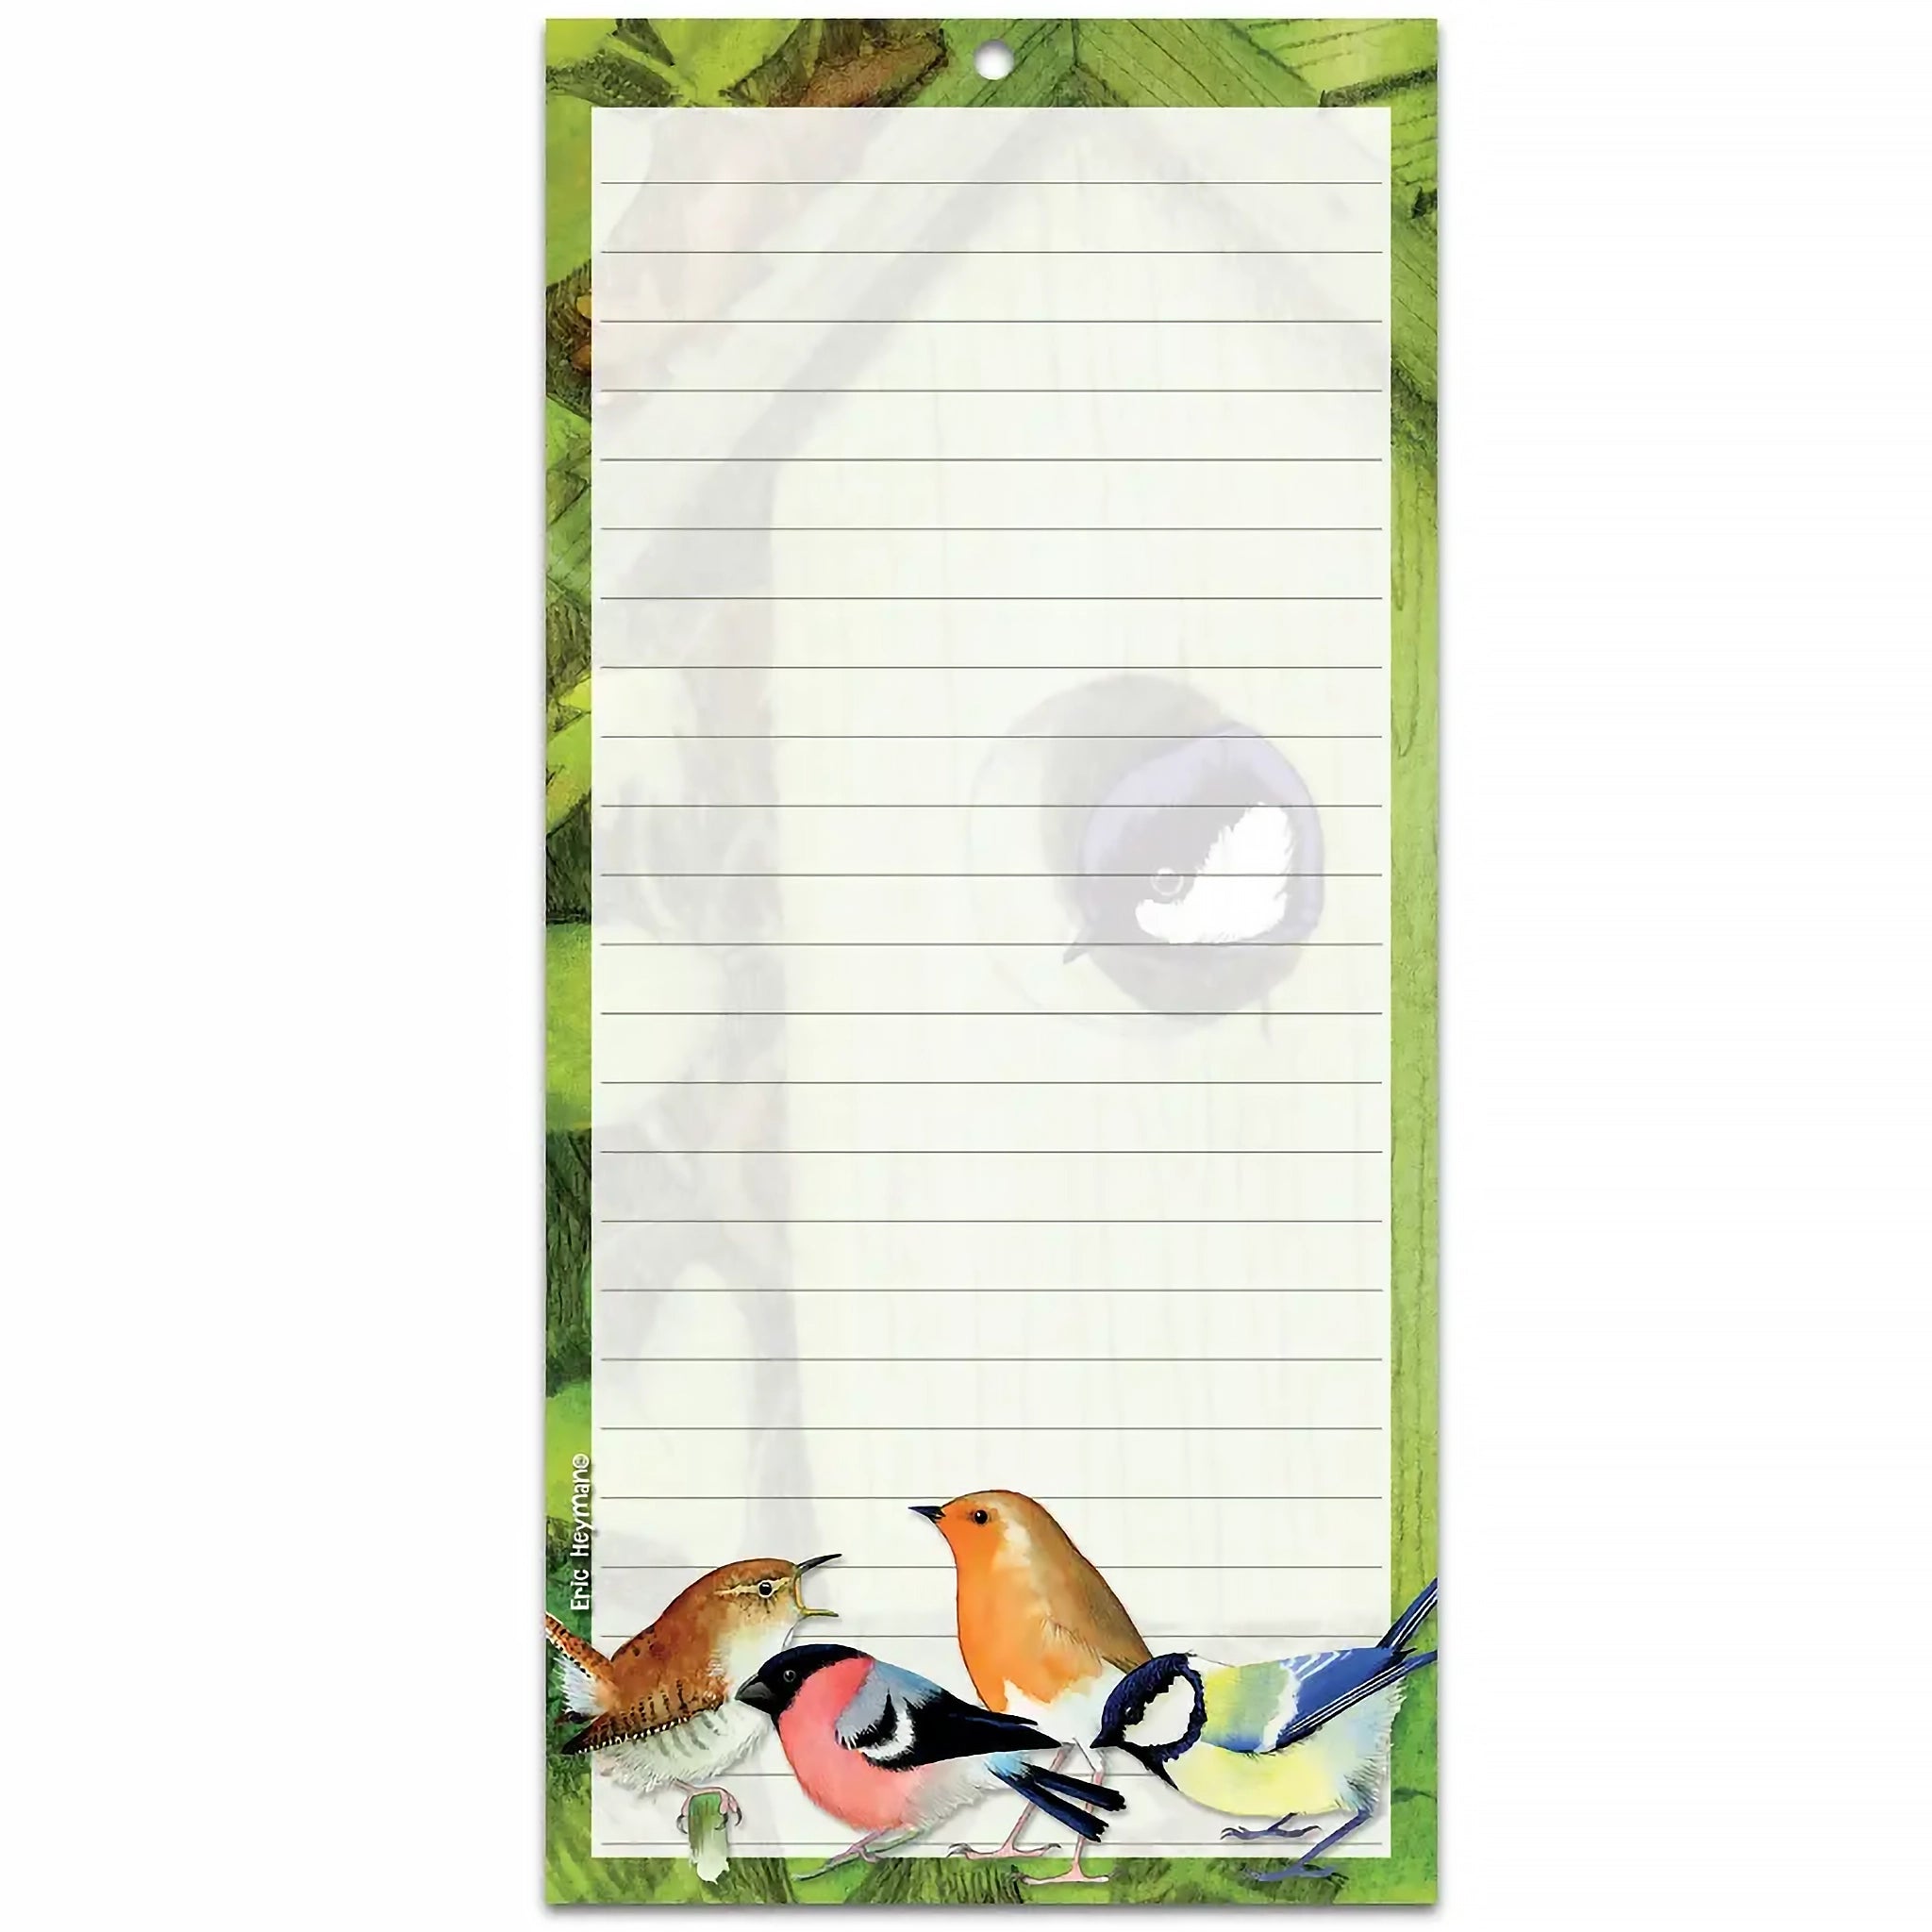 A long shopping pad notebook, lined and with a print of an illustration of British garden birds